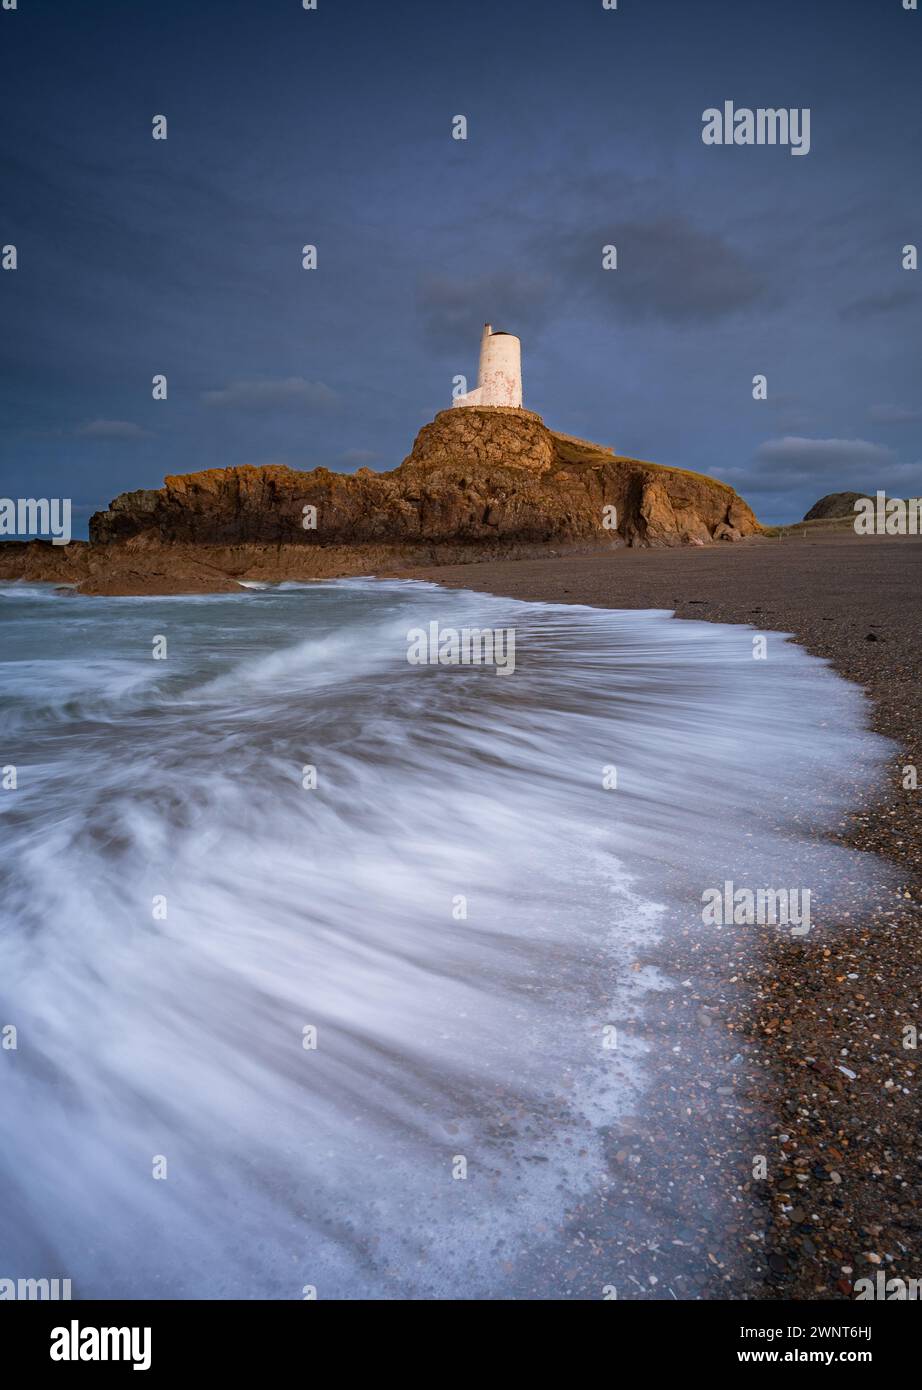 Making Waves: llanddwyn island   WALES THE BEAUTY of the wild, far western coasts of the UK can be seen captured in these astounding images.       Fro Stock Photo